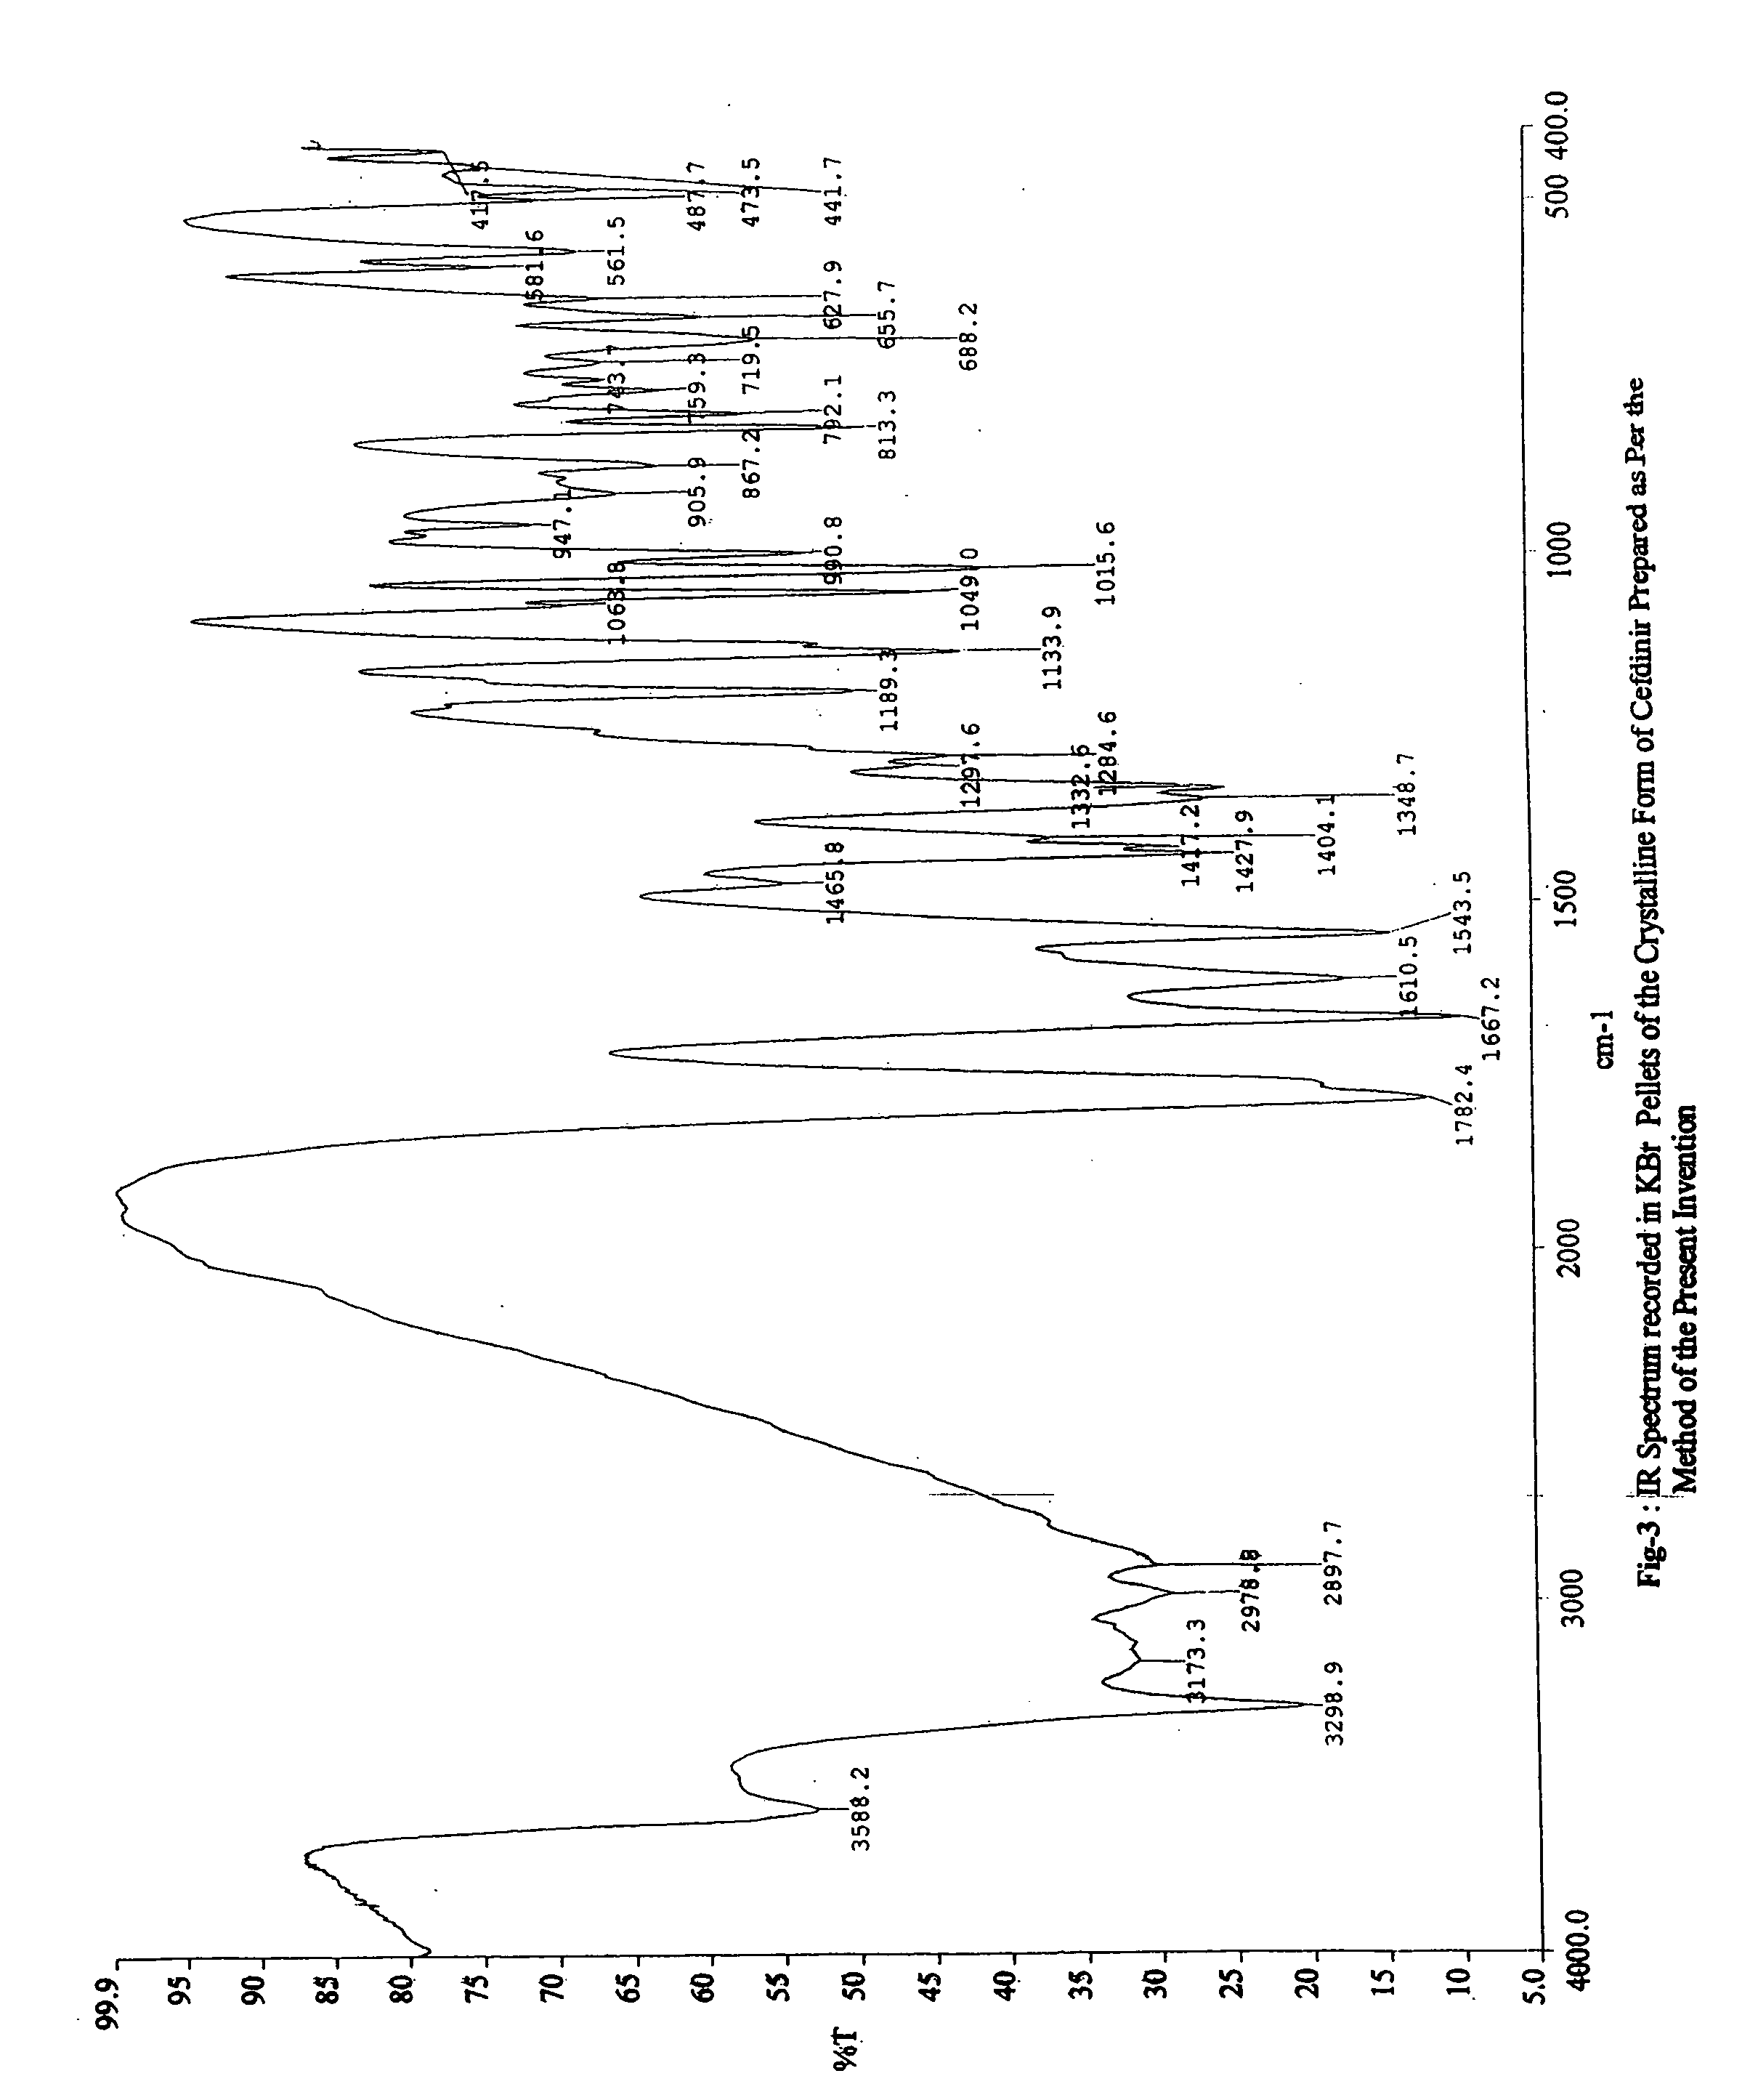 Stable bioavailable crystalline form of cefdinir and a process for the preparation thereof